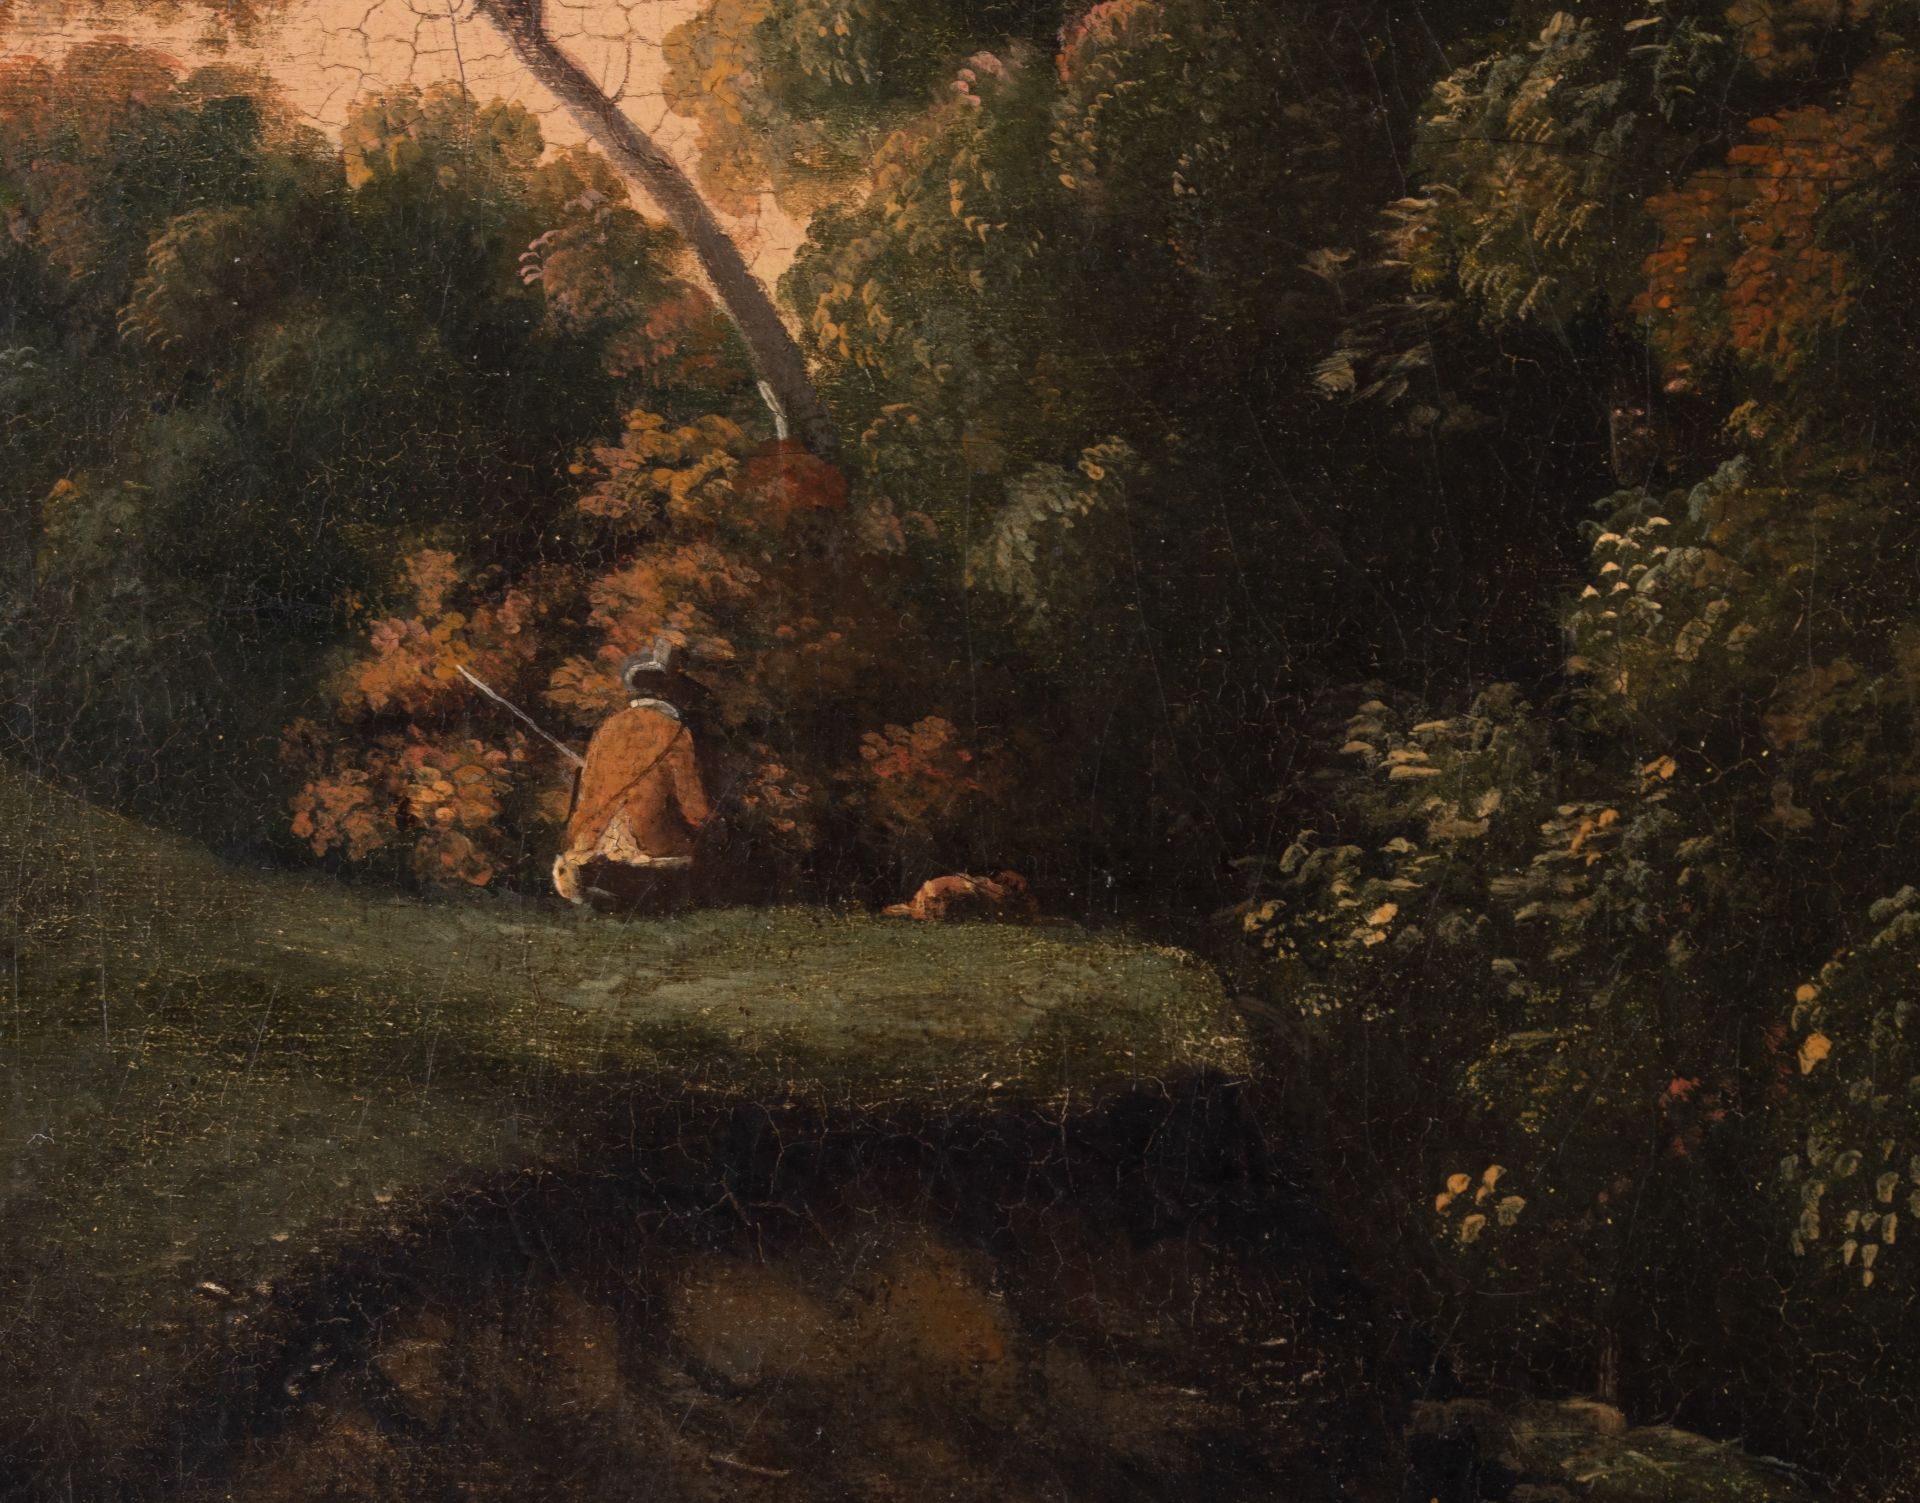 19thC copy after Jan Weynants (1632-1684), landscape with figures, oil on canvas, 45 x 56 cm - Image 6 of 7